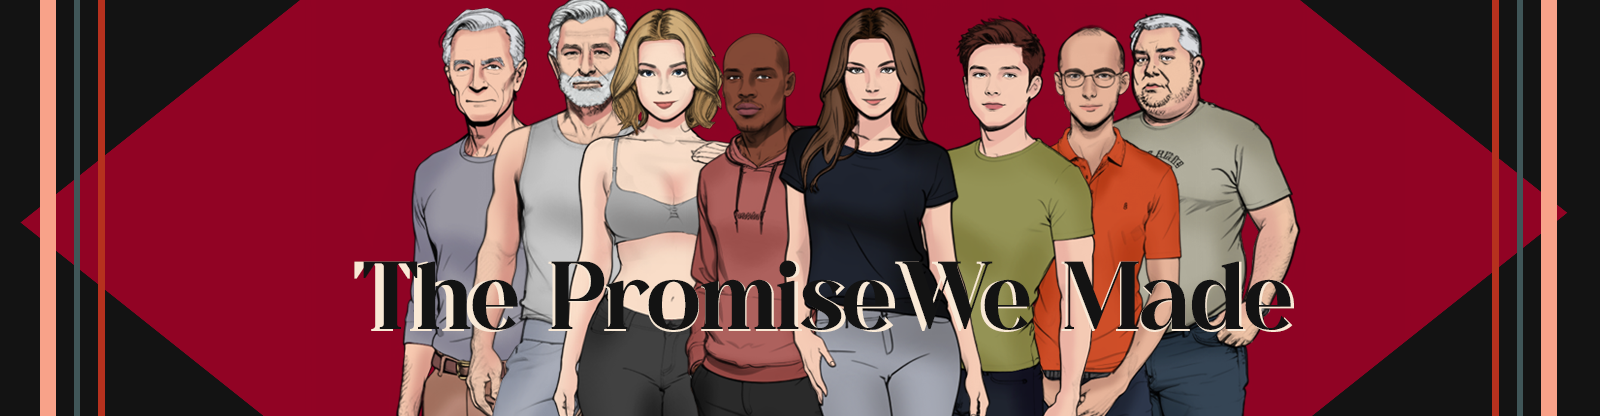 The Promise We Made poster